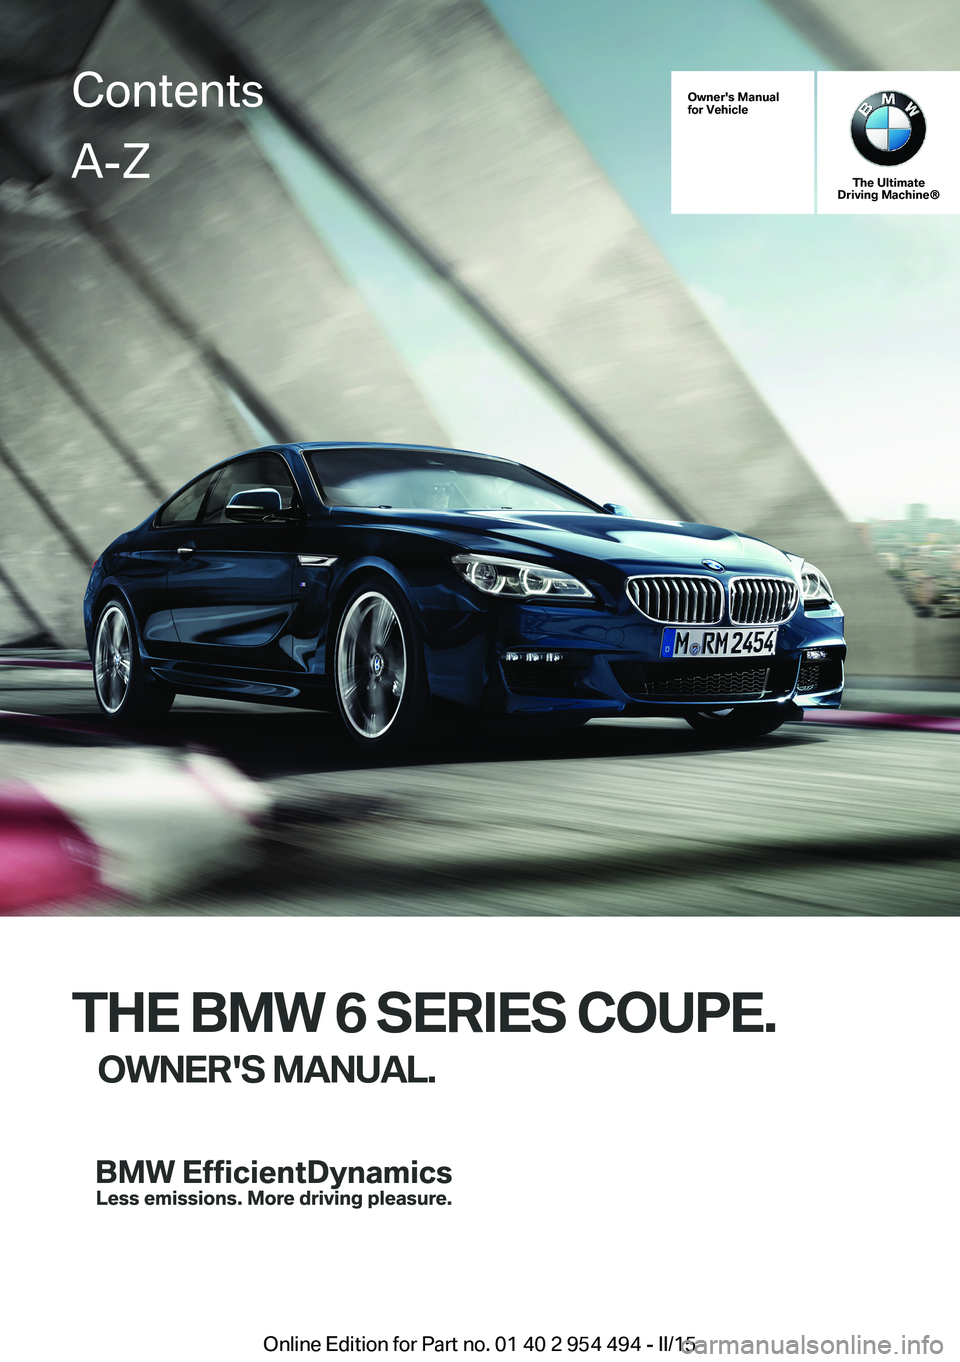 BMW 650I XDRIVE COUPE 2015  Owners Manual Owner's Manualfor Vehicle
The UltimateDriving Machine®
THE BMW 6 SERIES COUPE.
OWNER'S MANUAL.ContentsA-Z
Online Edition for Part no. 01 40 2 954 494 - II/15   